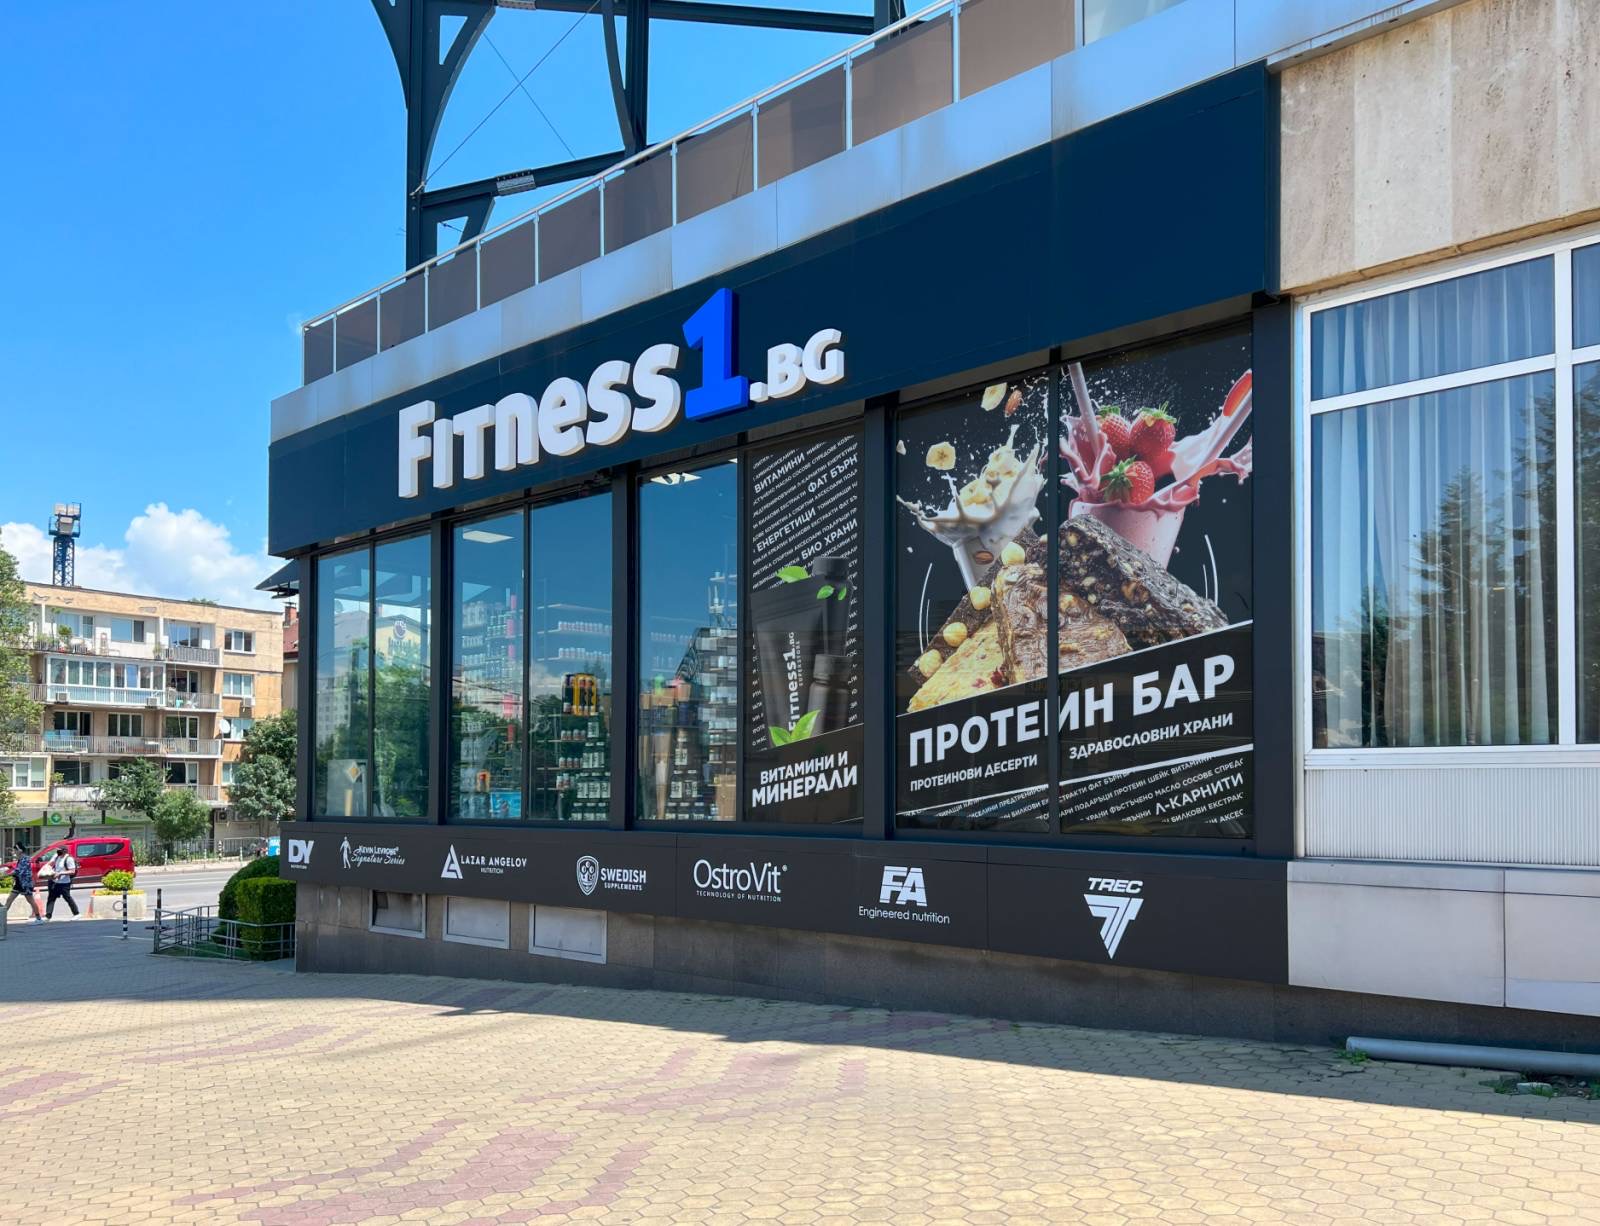 A storefront branding for Fitness 1 by J-point